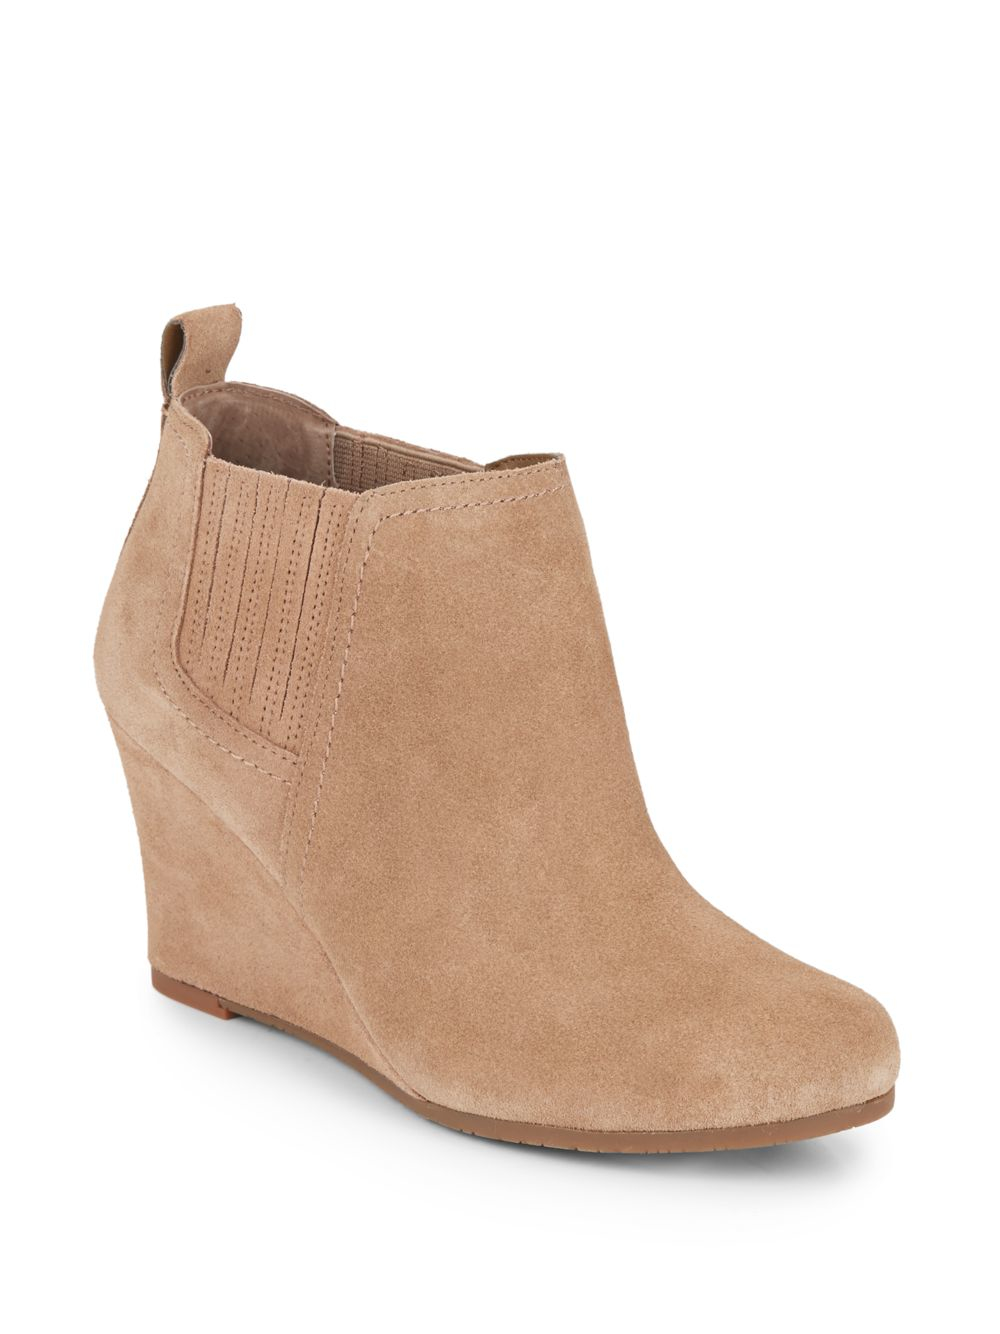 Dolce Vita Jentry Open Back Booties in Nude (Natural) - Lyst